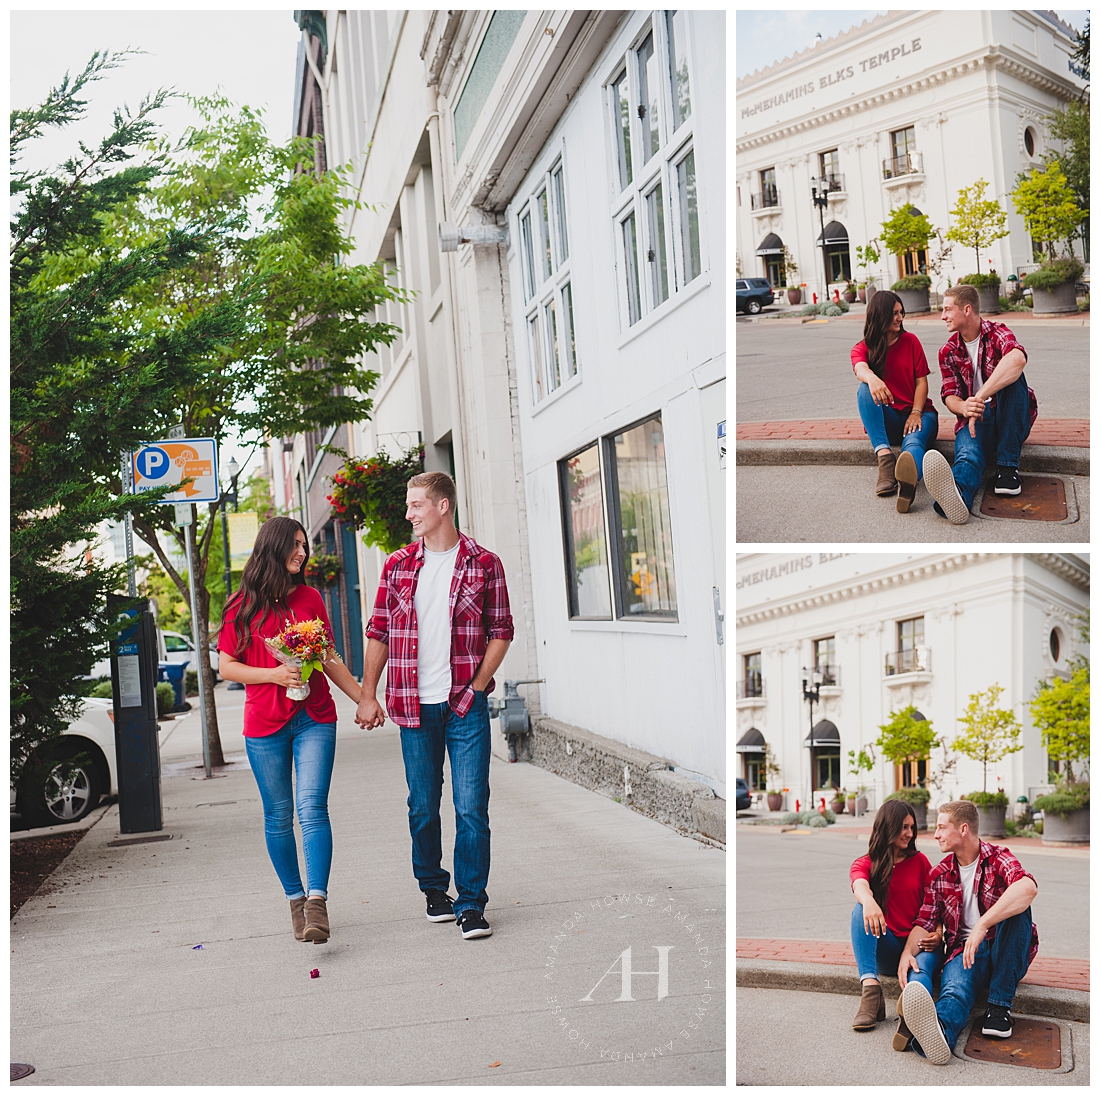 High School Couple Walking Down the Street | Senior Portraits with Your Significant Other | AHP 